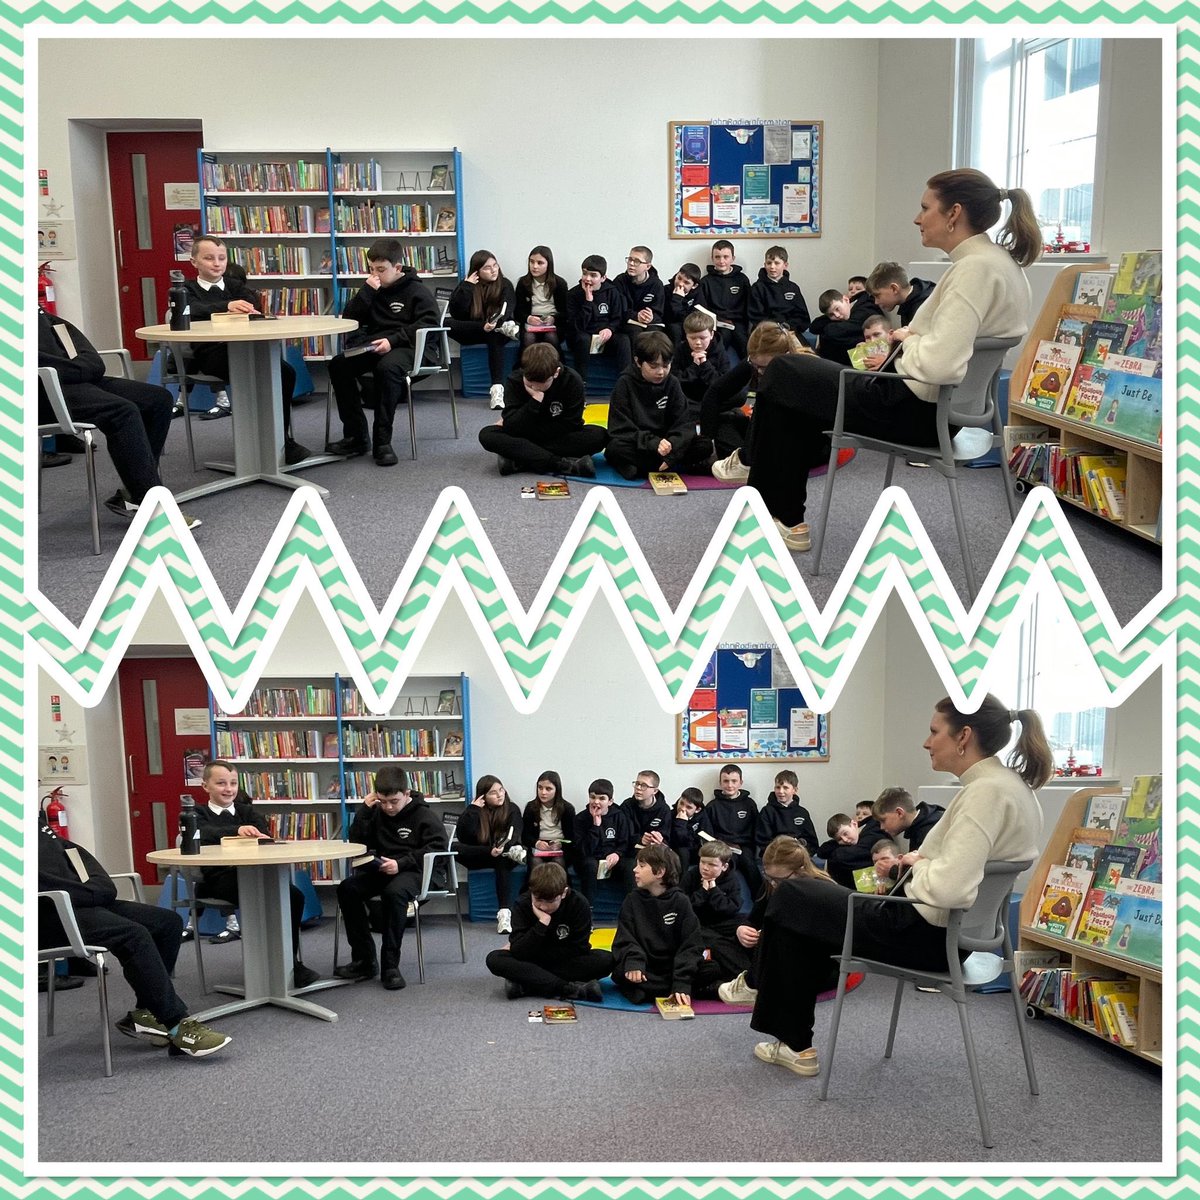 Primary 7 Me and Mo joined forces to discuss all of the books that we’ve been reading; providing suggestions to our peers and discussing what we would like to see in our school library 😍 #teamannbank #p7 #southayrshireREADS #pupilvoice #readingforpleasure